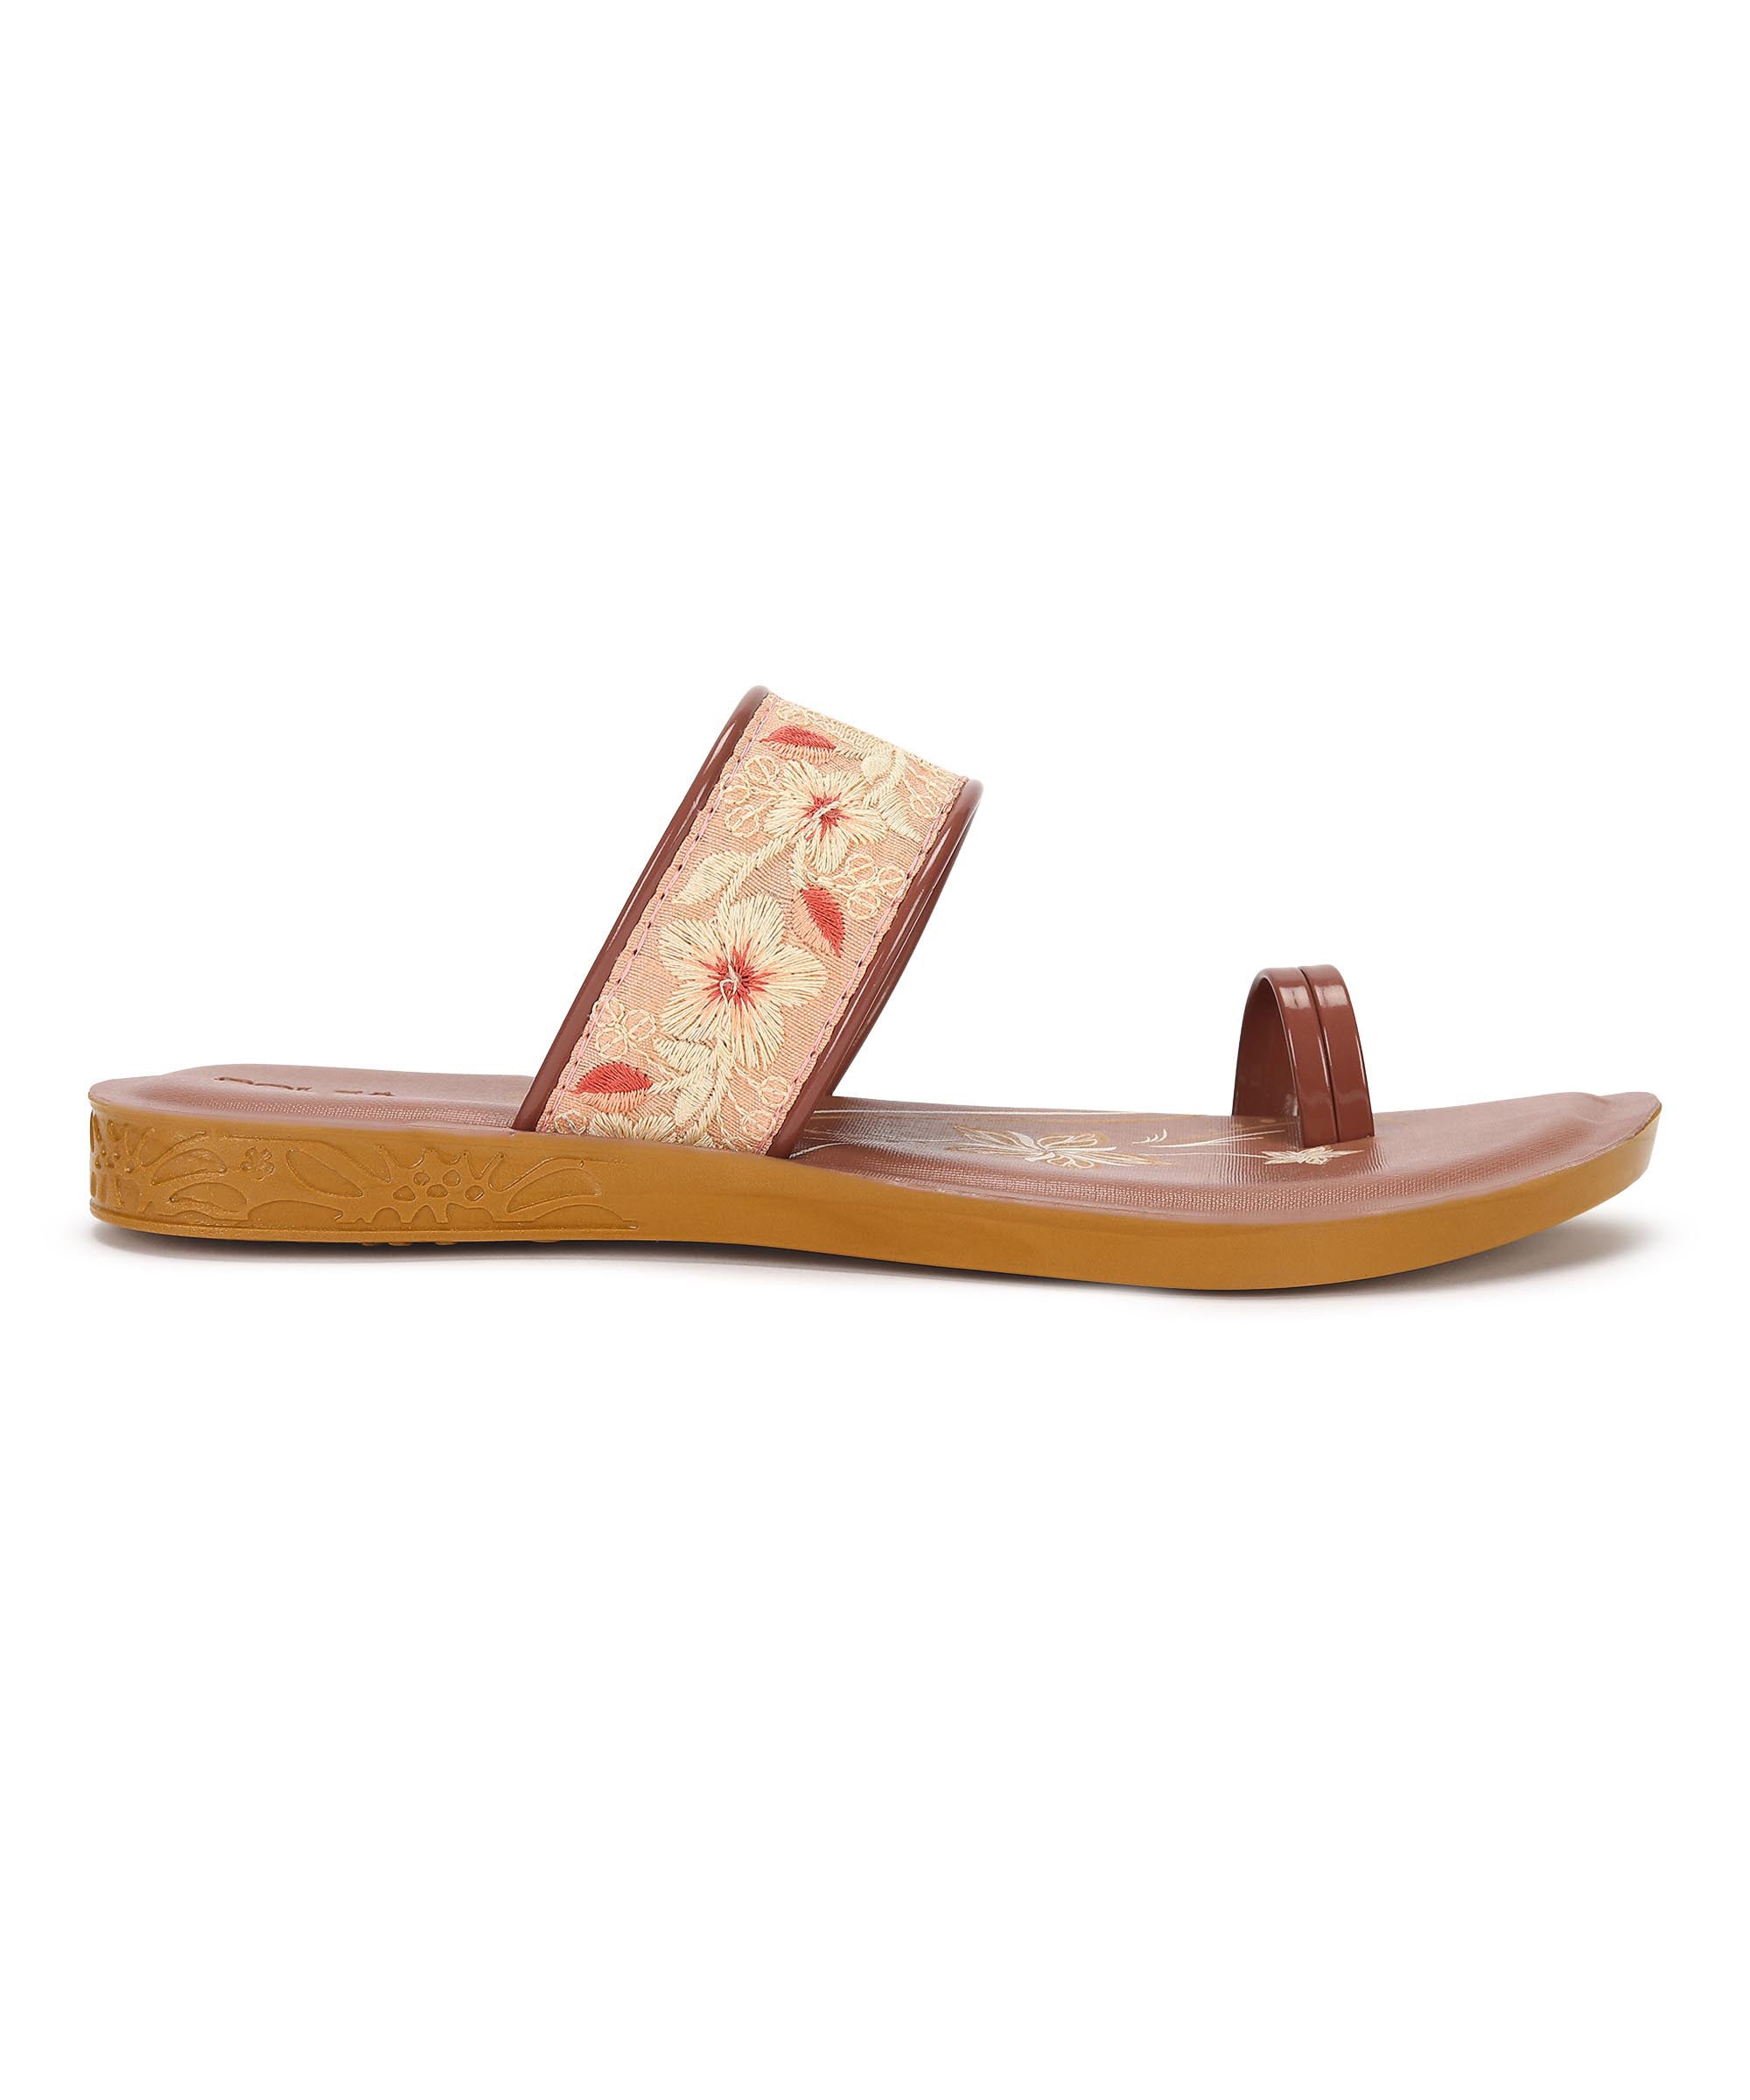 Paragon PUK7013L Women Sandals | Casual &amp; Formal Sandals | Stylish, Comfortable &amp; Durable | For Daily &amp; Occasion Wear